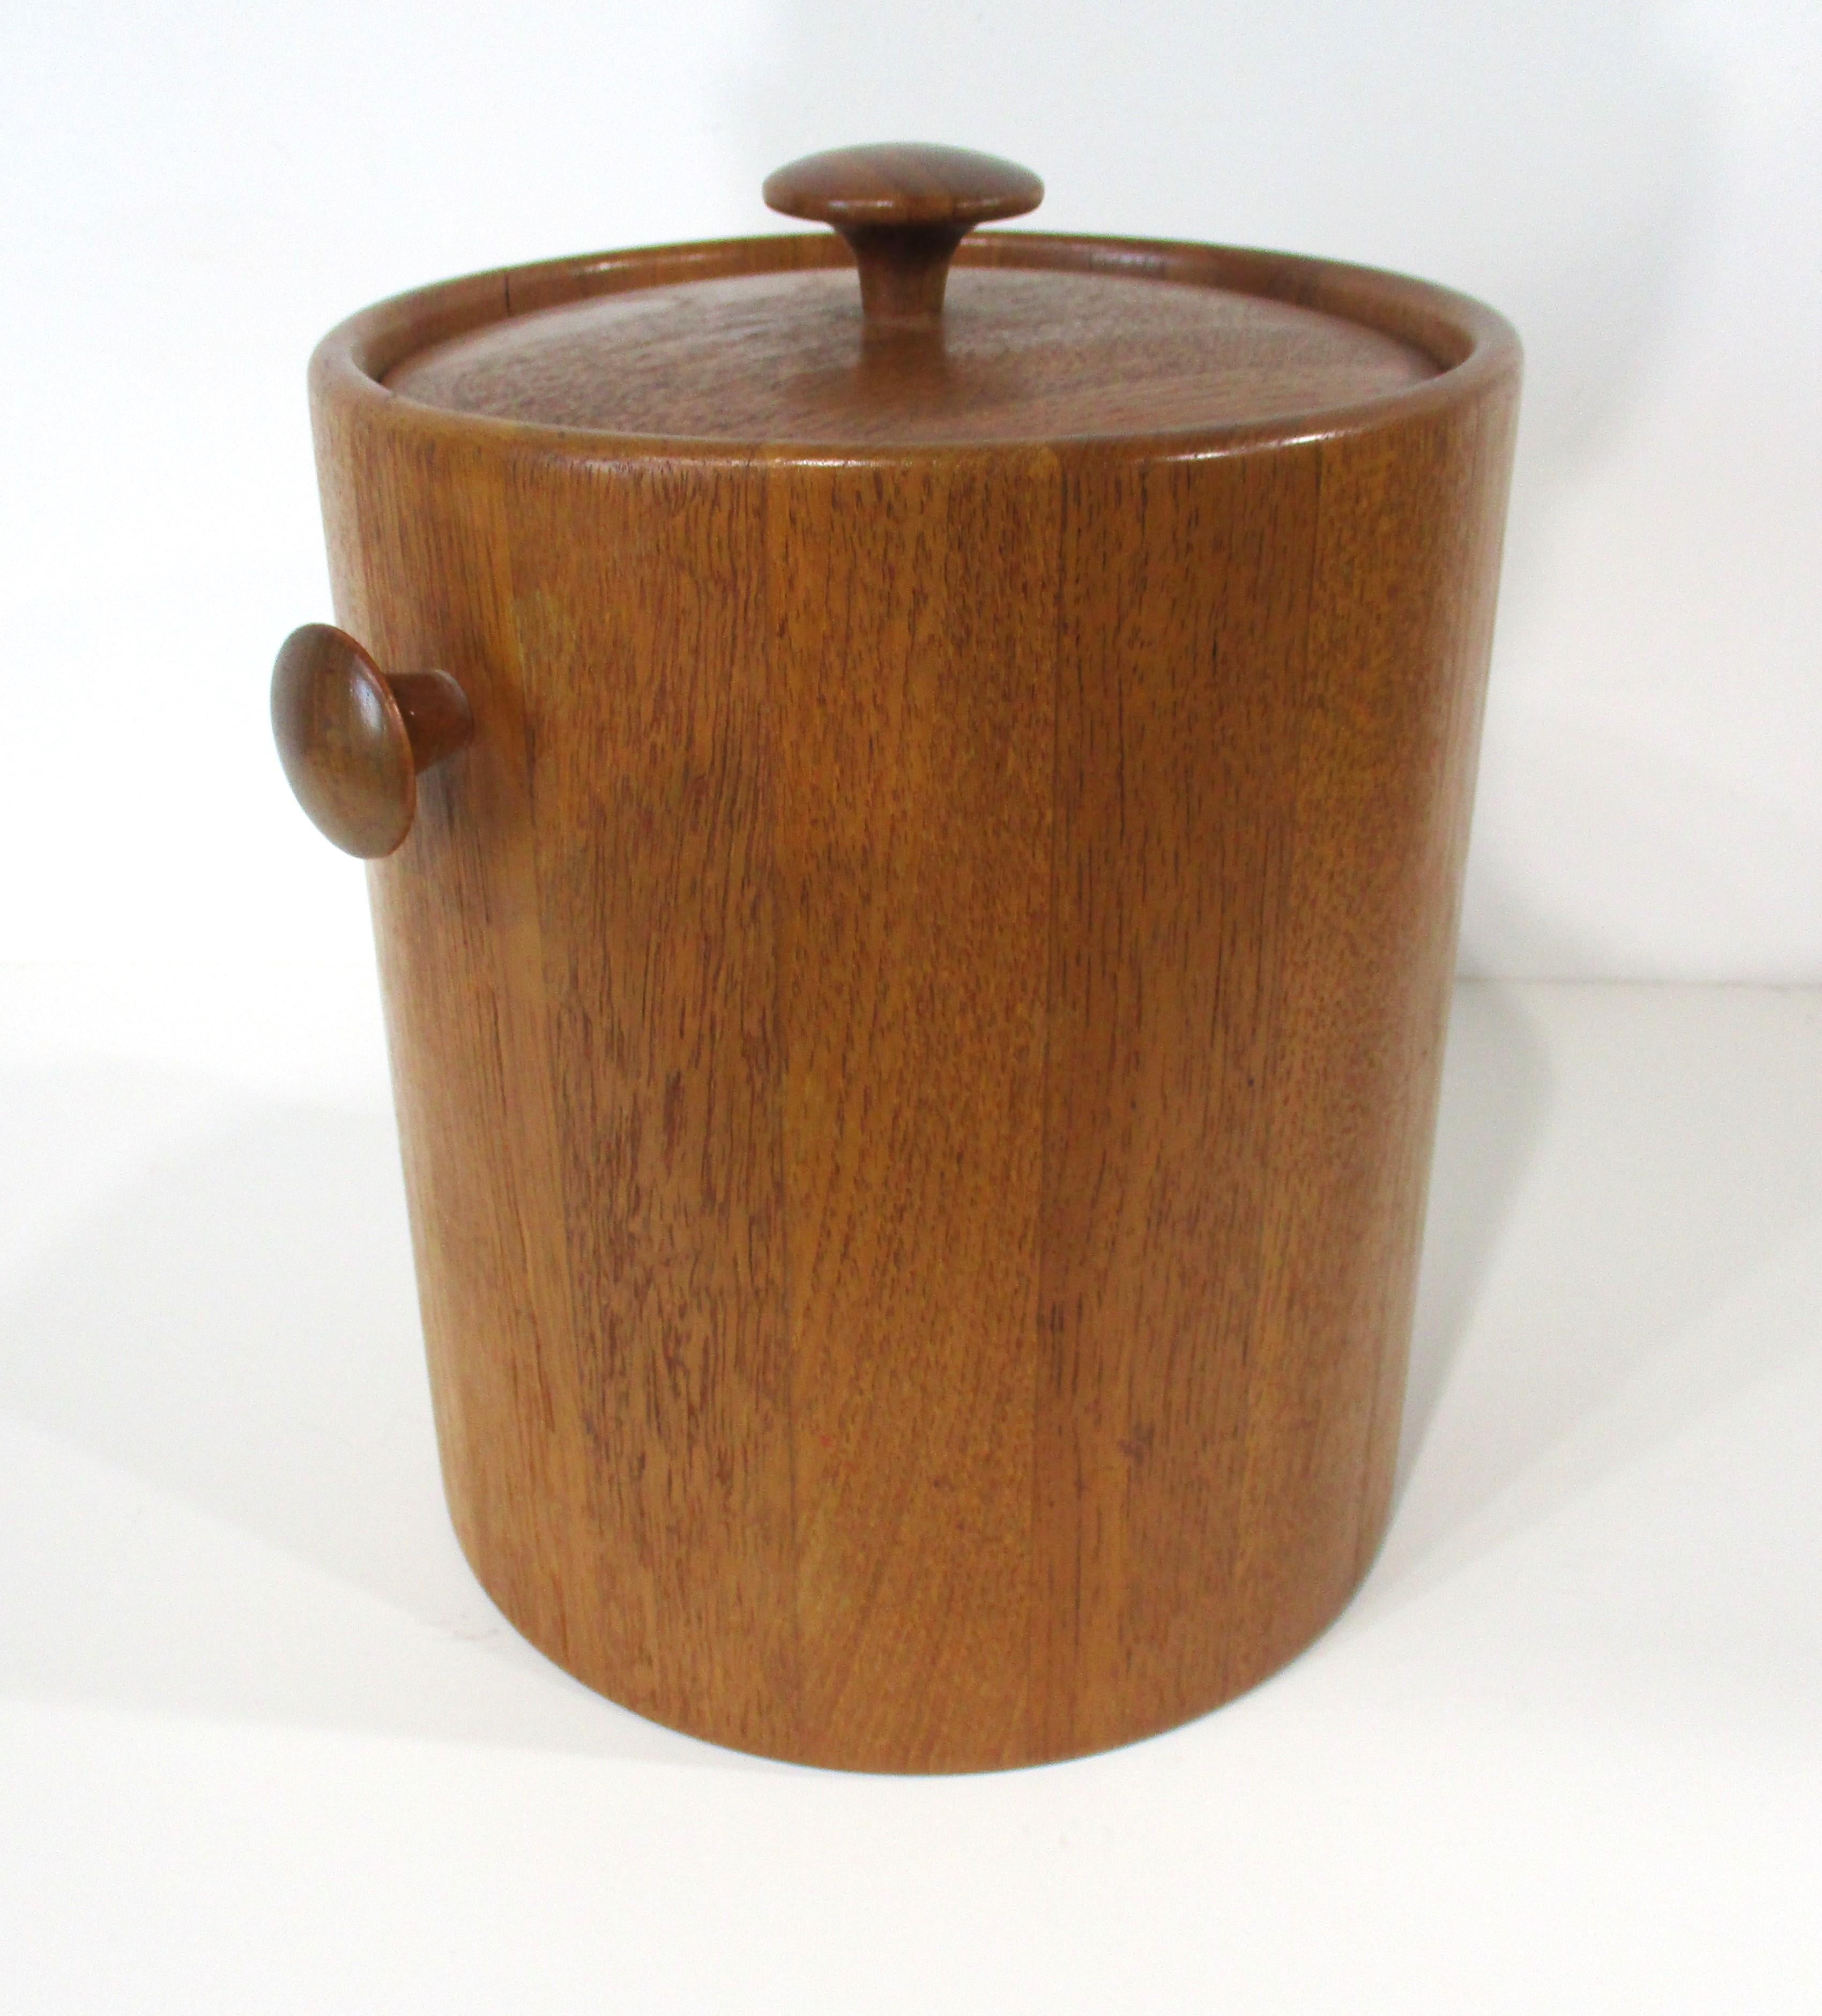 A teak wood ice bucket with matching knob on the lid and sides for easy use having a foam insert to keep things cool . Also inside is a removeable for cleaning plastic bucket which slips in and out . Designed in the manner of the Dansk company made